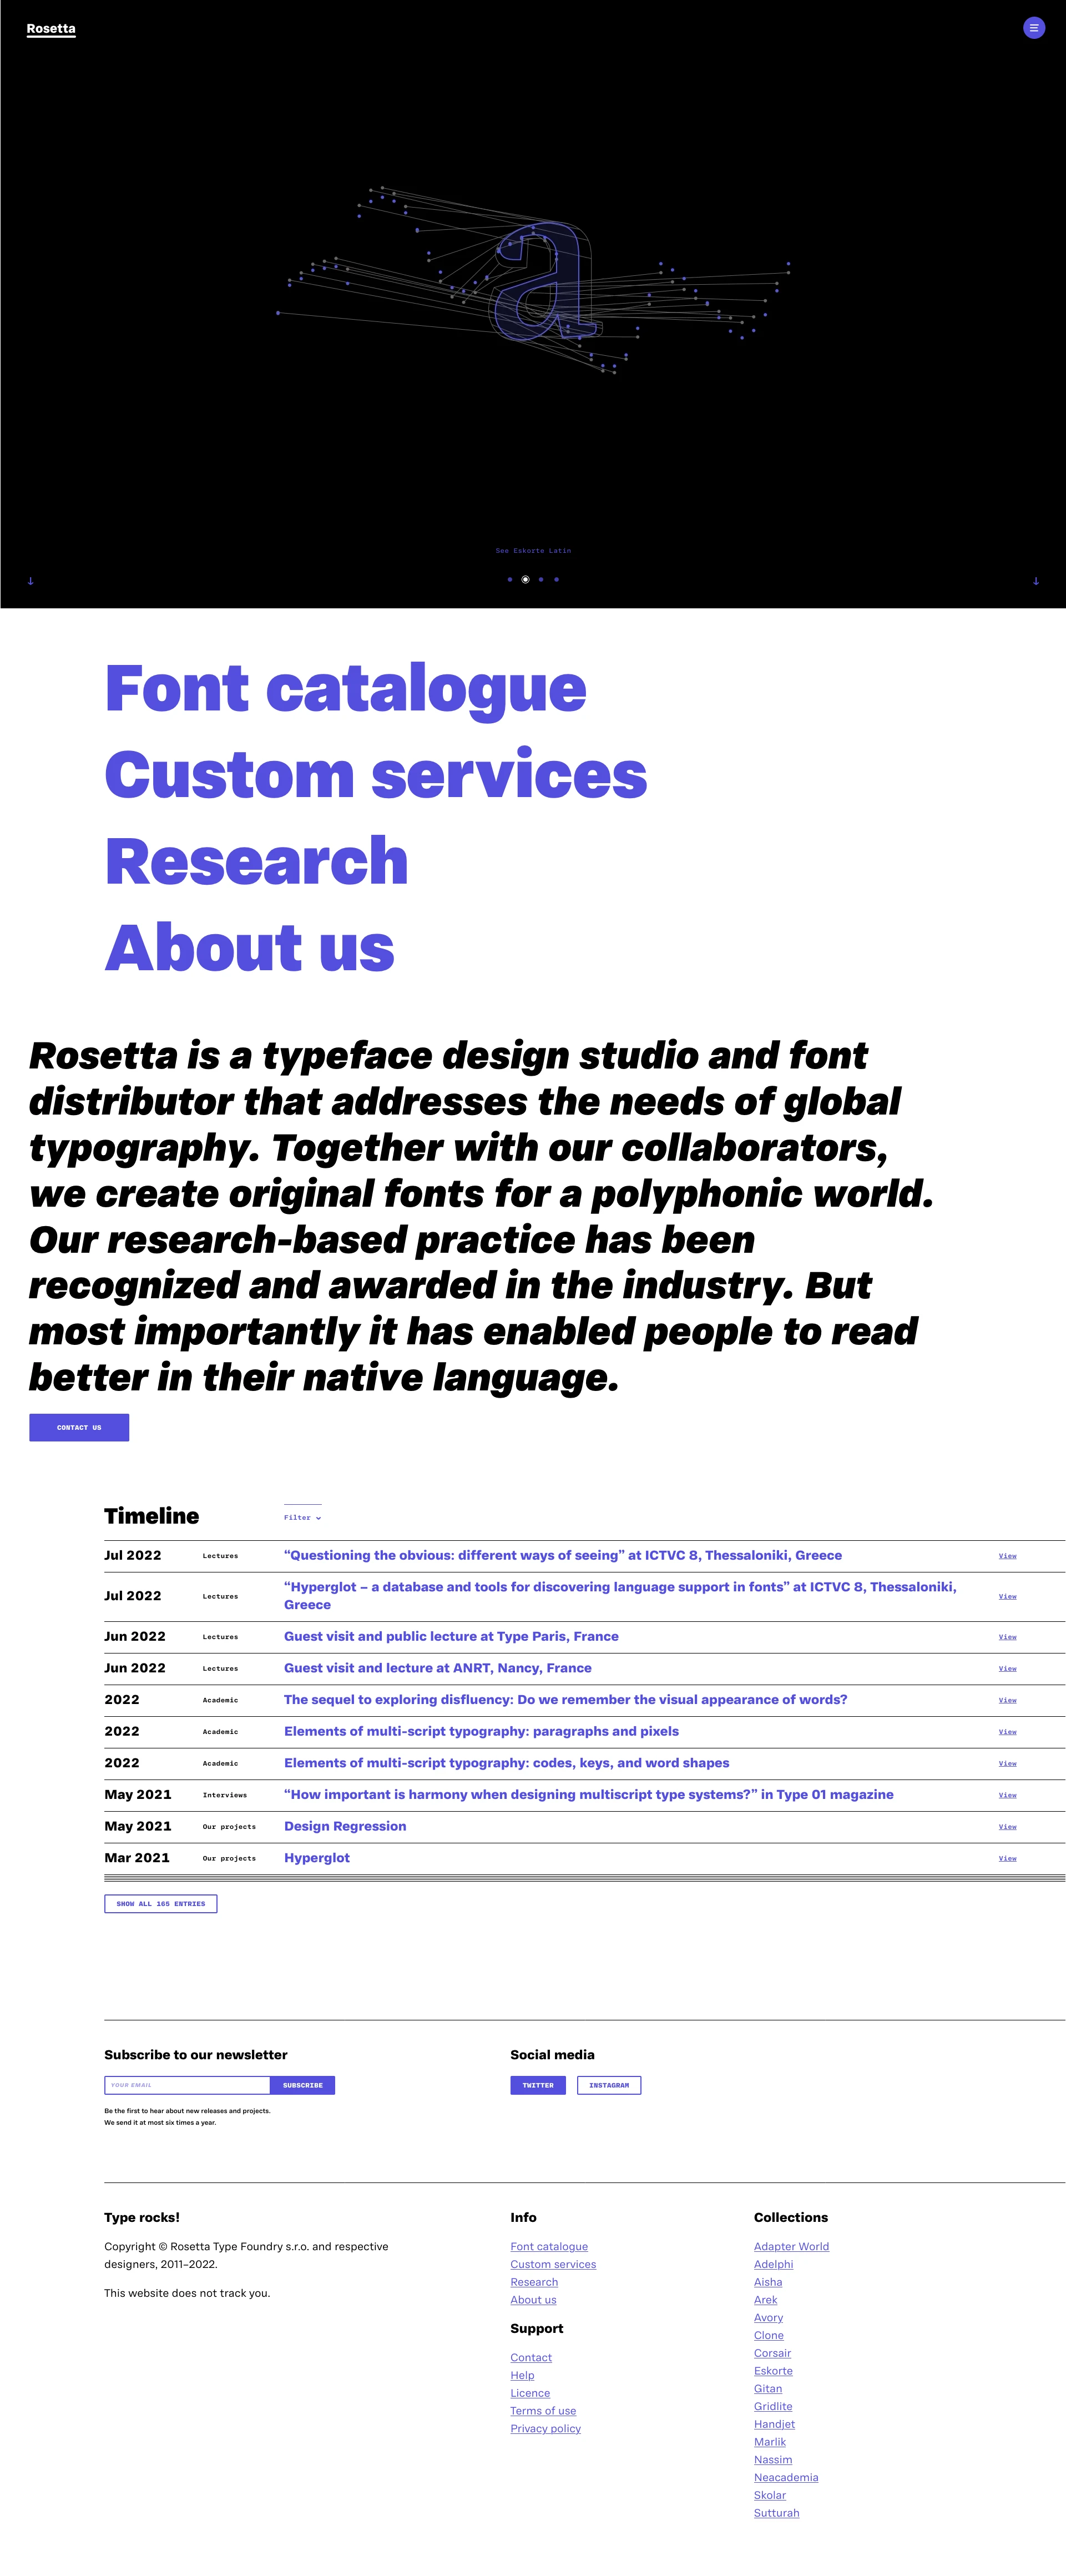 Rosetta Landing Page Example: Rosetta is a typeface design studio and font distributor that addresses the needs of global typography. Together with our collaborators, we create original fonts for a polyphonic world. Our research-based practice has been recognized and awarded in the industry. But most importantly it has enabled people to read better in their native language.